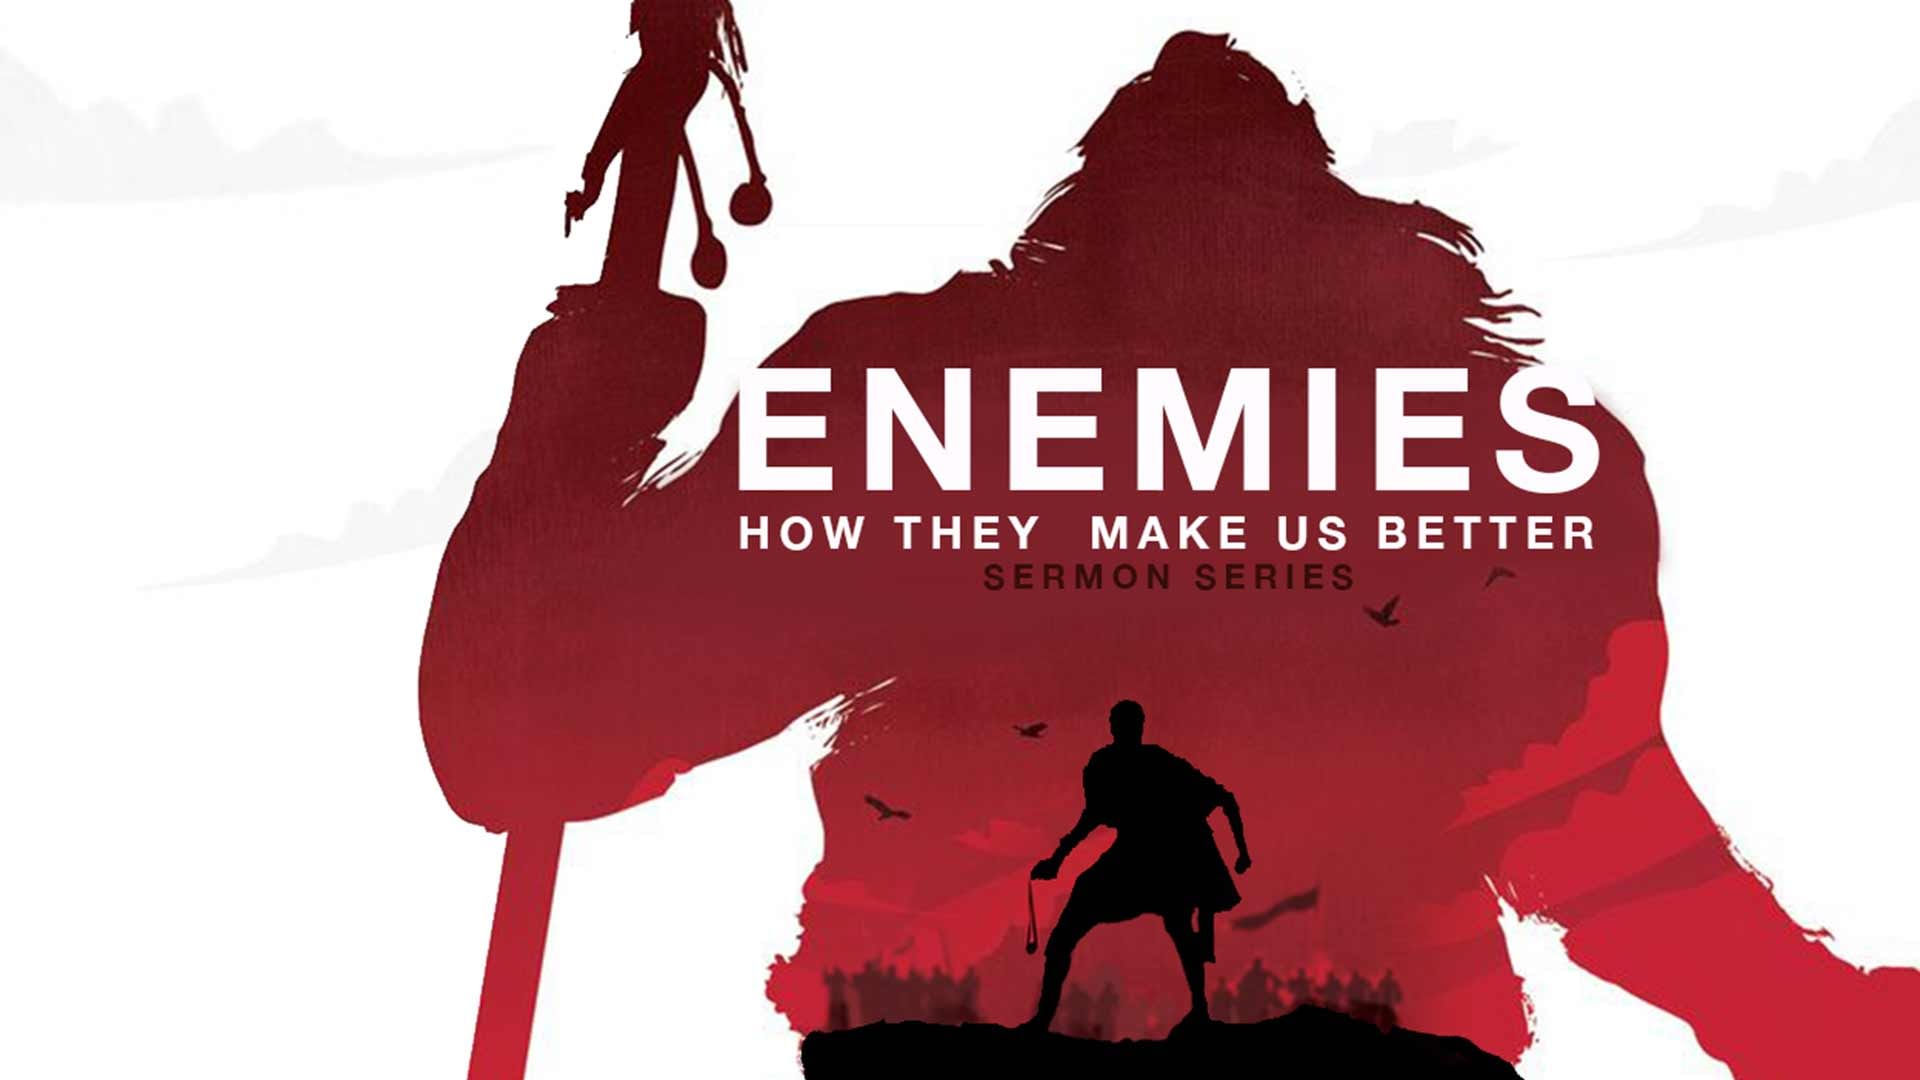 Enemies. How they make us better